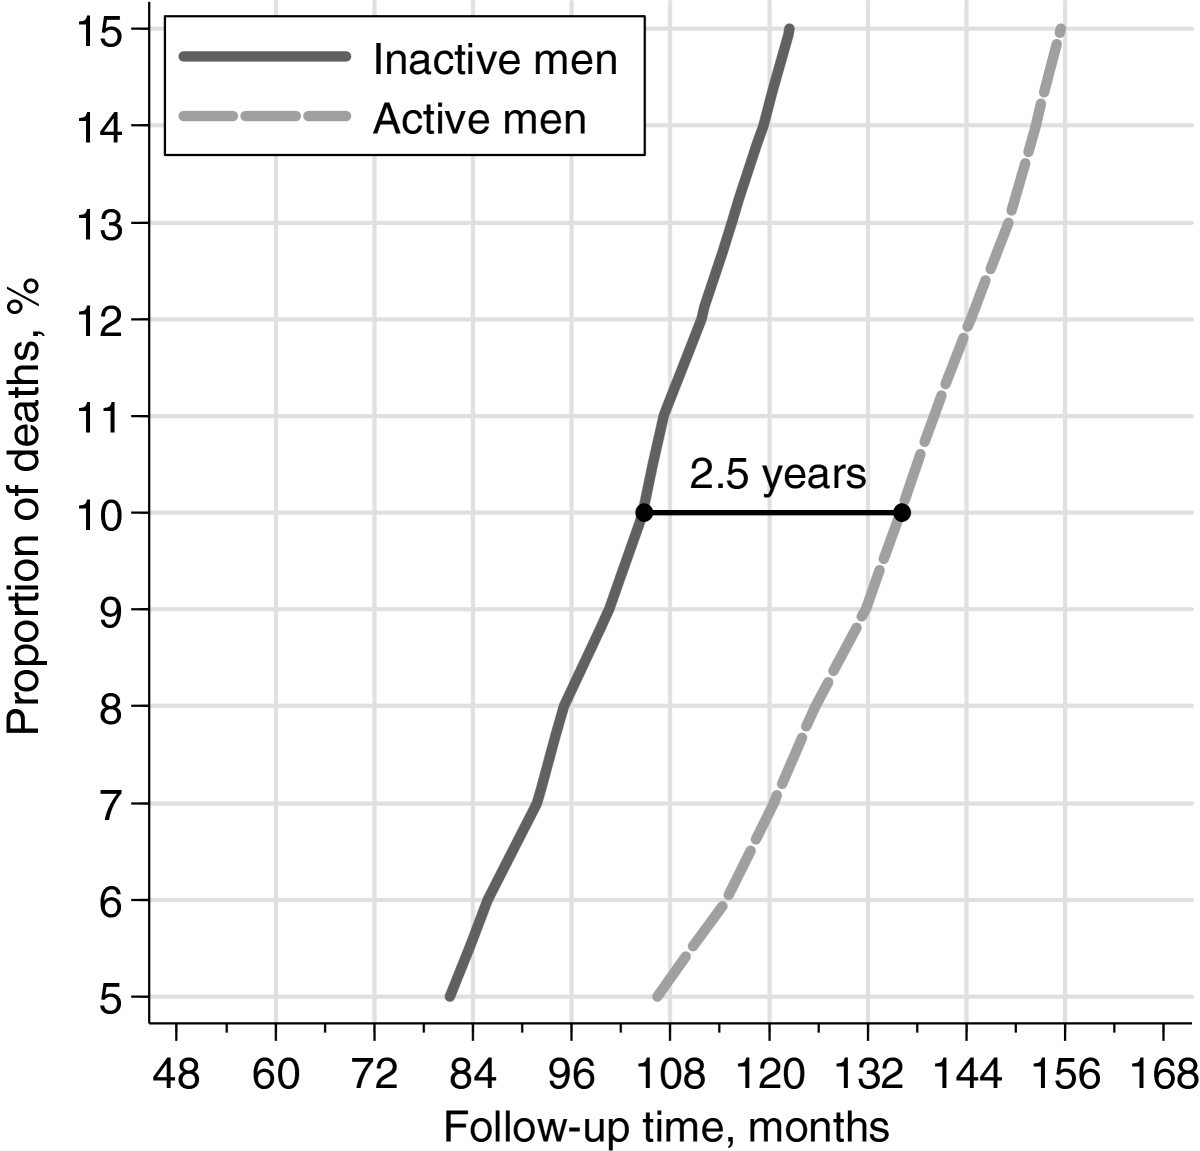 Physical Activity And Mortality In A Prospective Cohort Of Middle Aged And Elderly Men A Time Perspective International Journal Of Behavioral Nutrition And Physical Activity Full Text